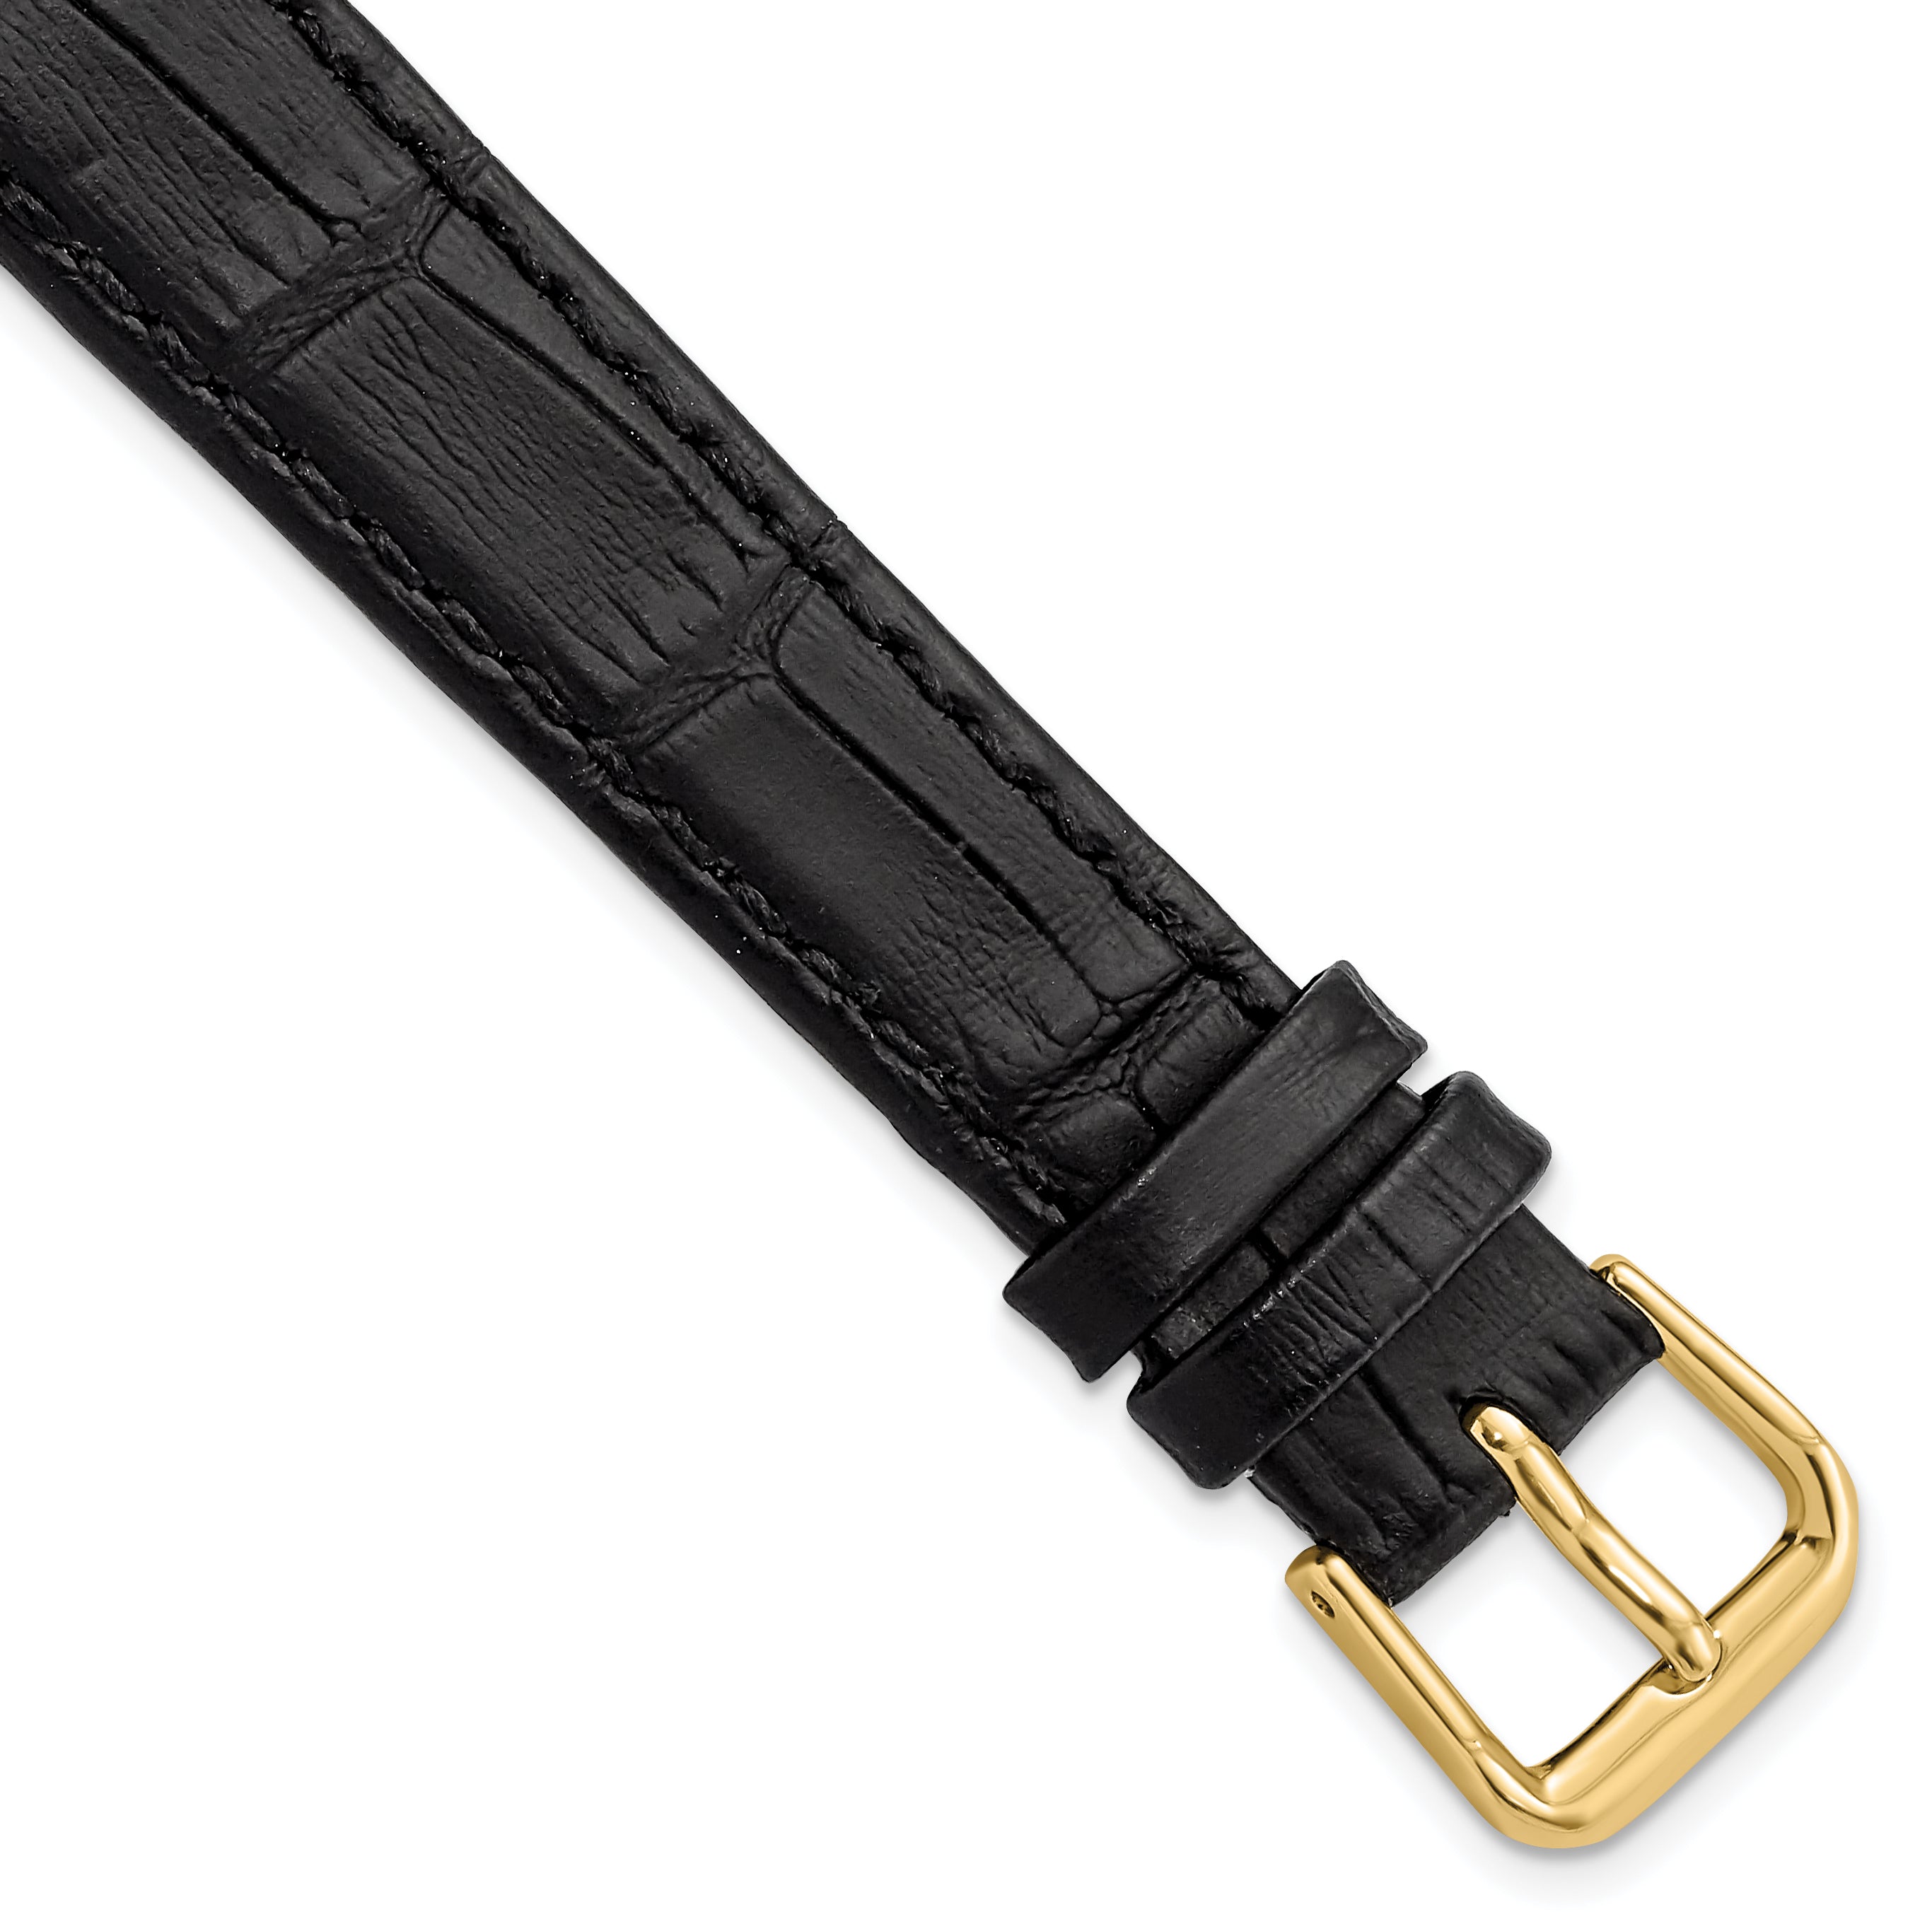 DeBeer 14mm Black Matte Wild Alligator Grain Leather with Gold-tone Buckle 6.75 inch Watch Band